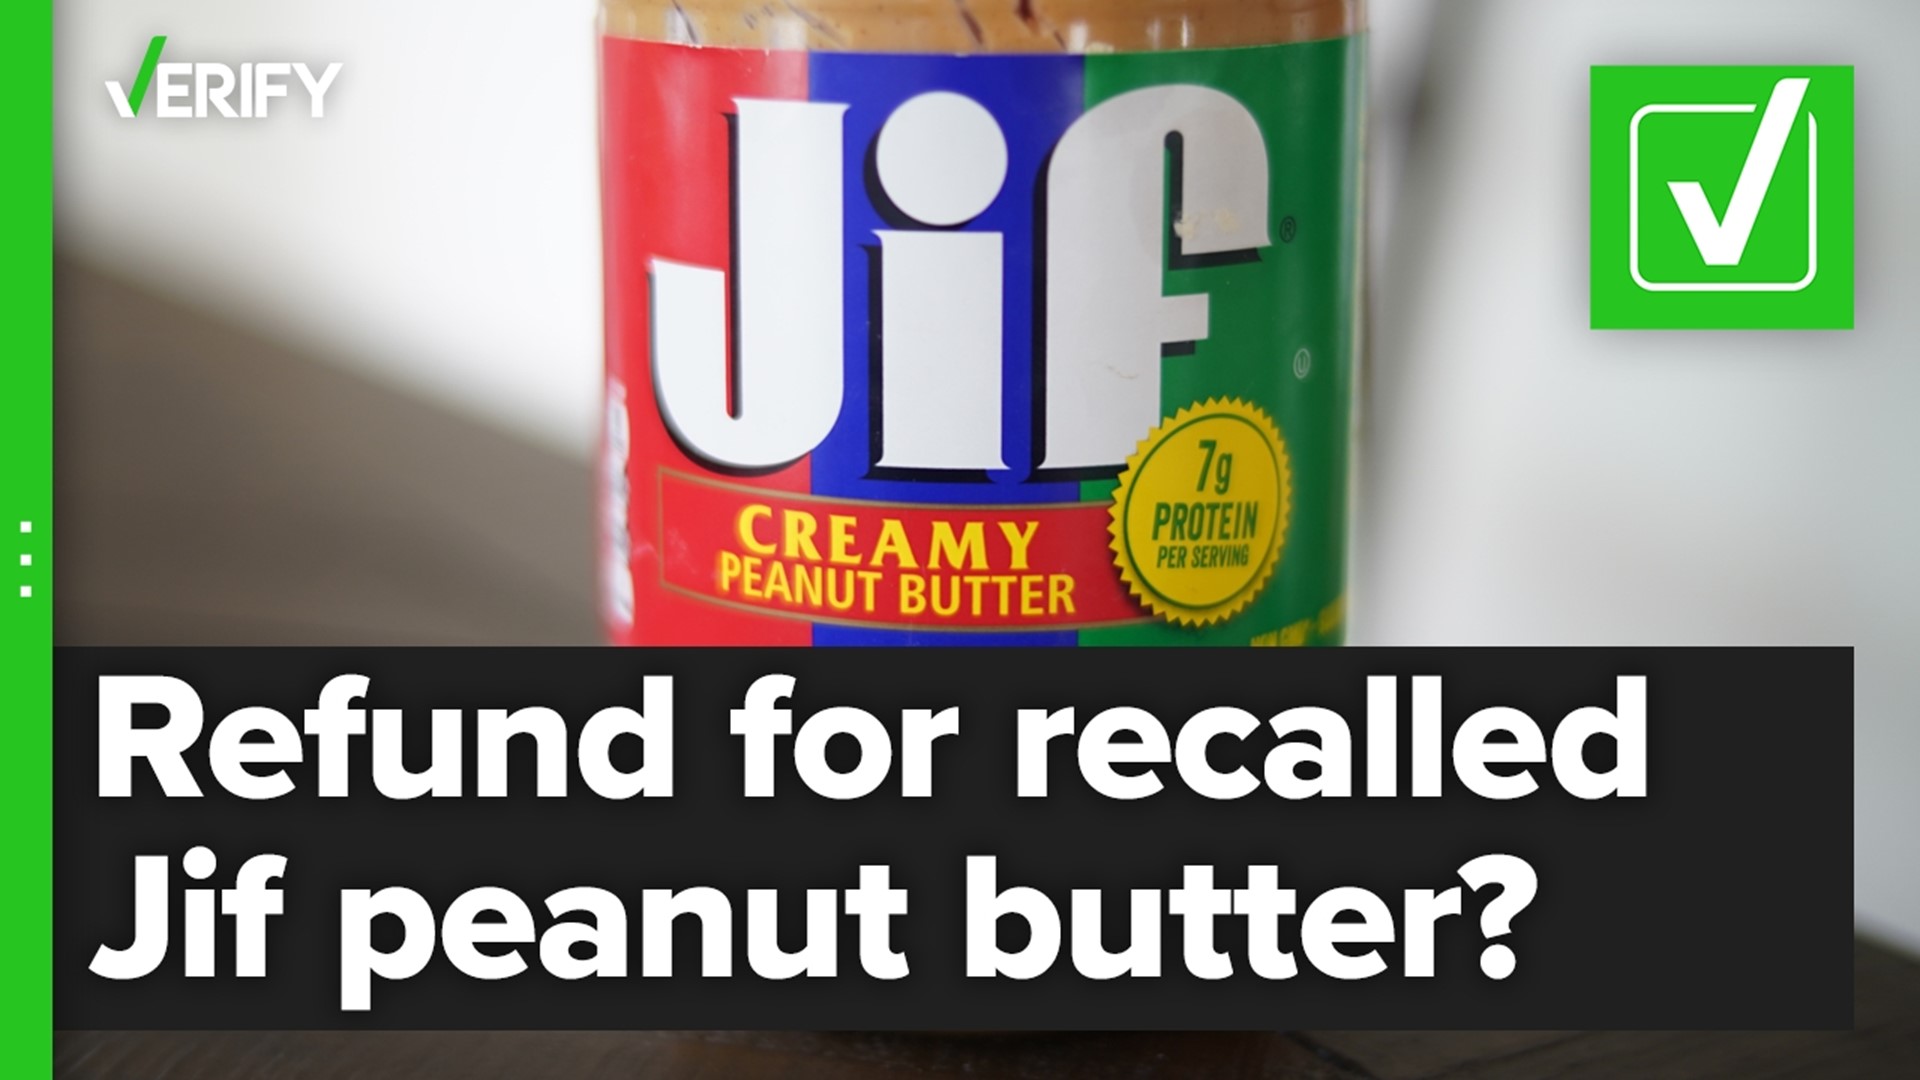 Jif recalled dozens of peanut butter products for potential salmonella contamination. Here’s how customers can get a refund for the affected items.